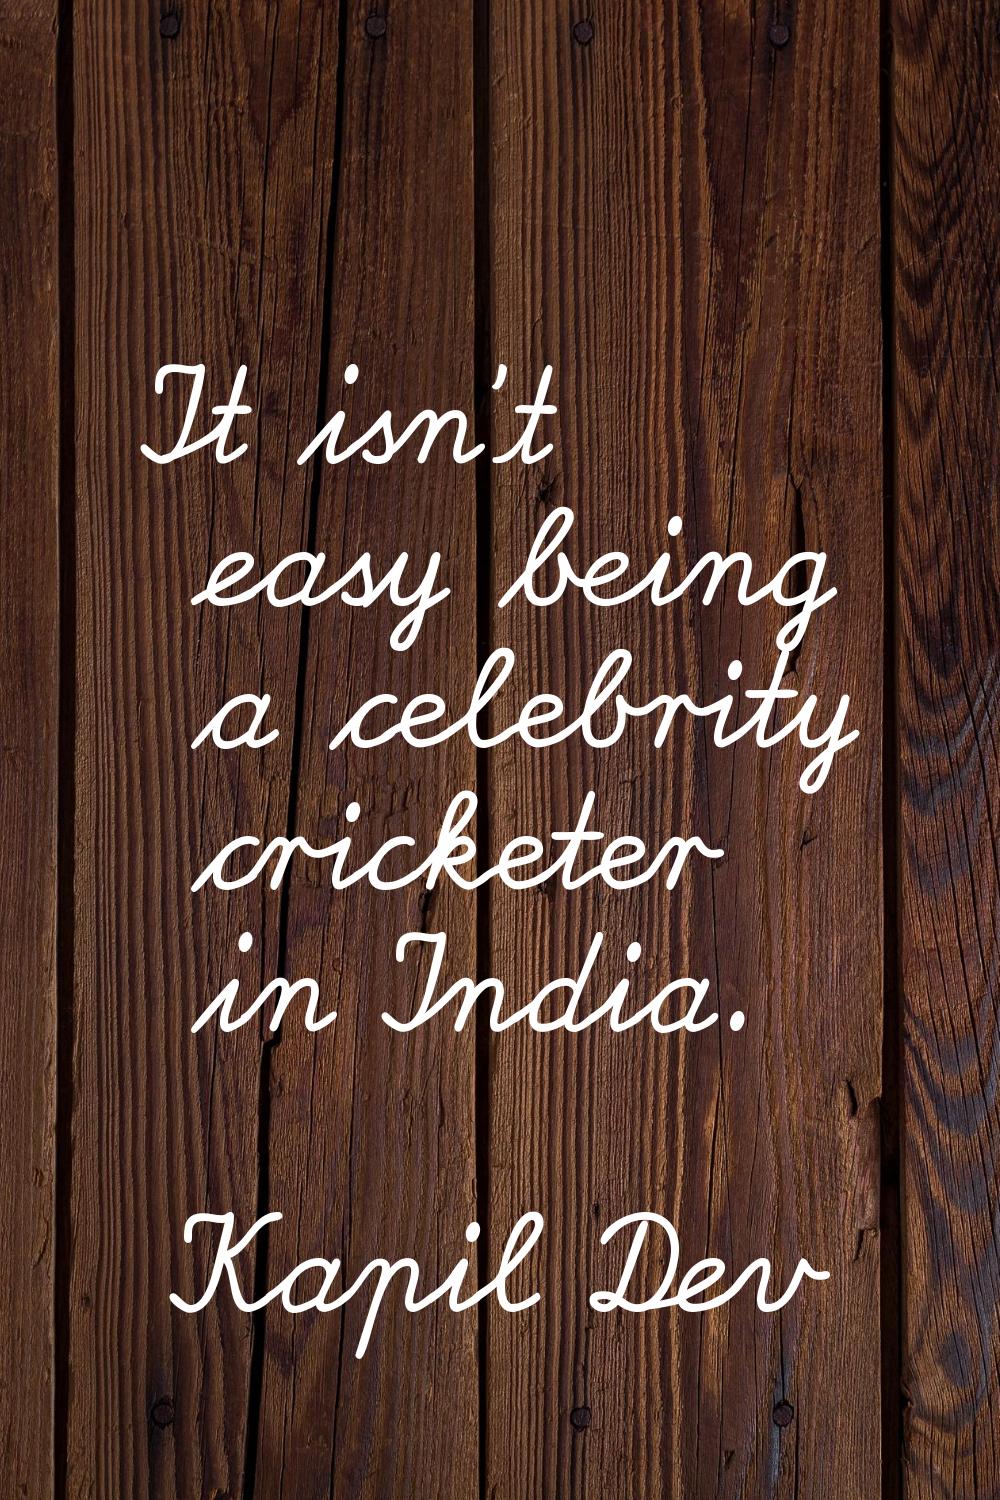 It isn't easy being a celebrity cricketer in India.